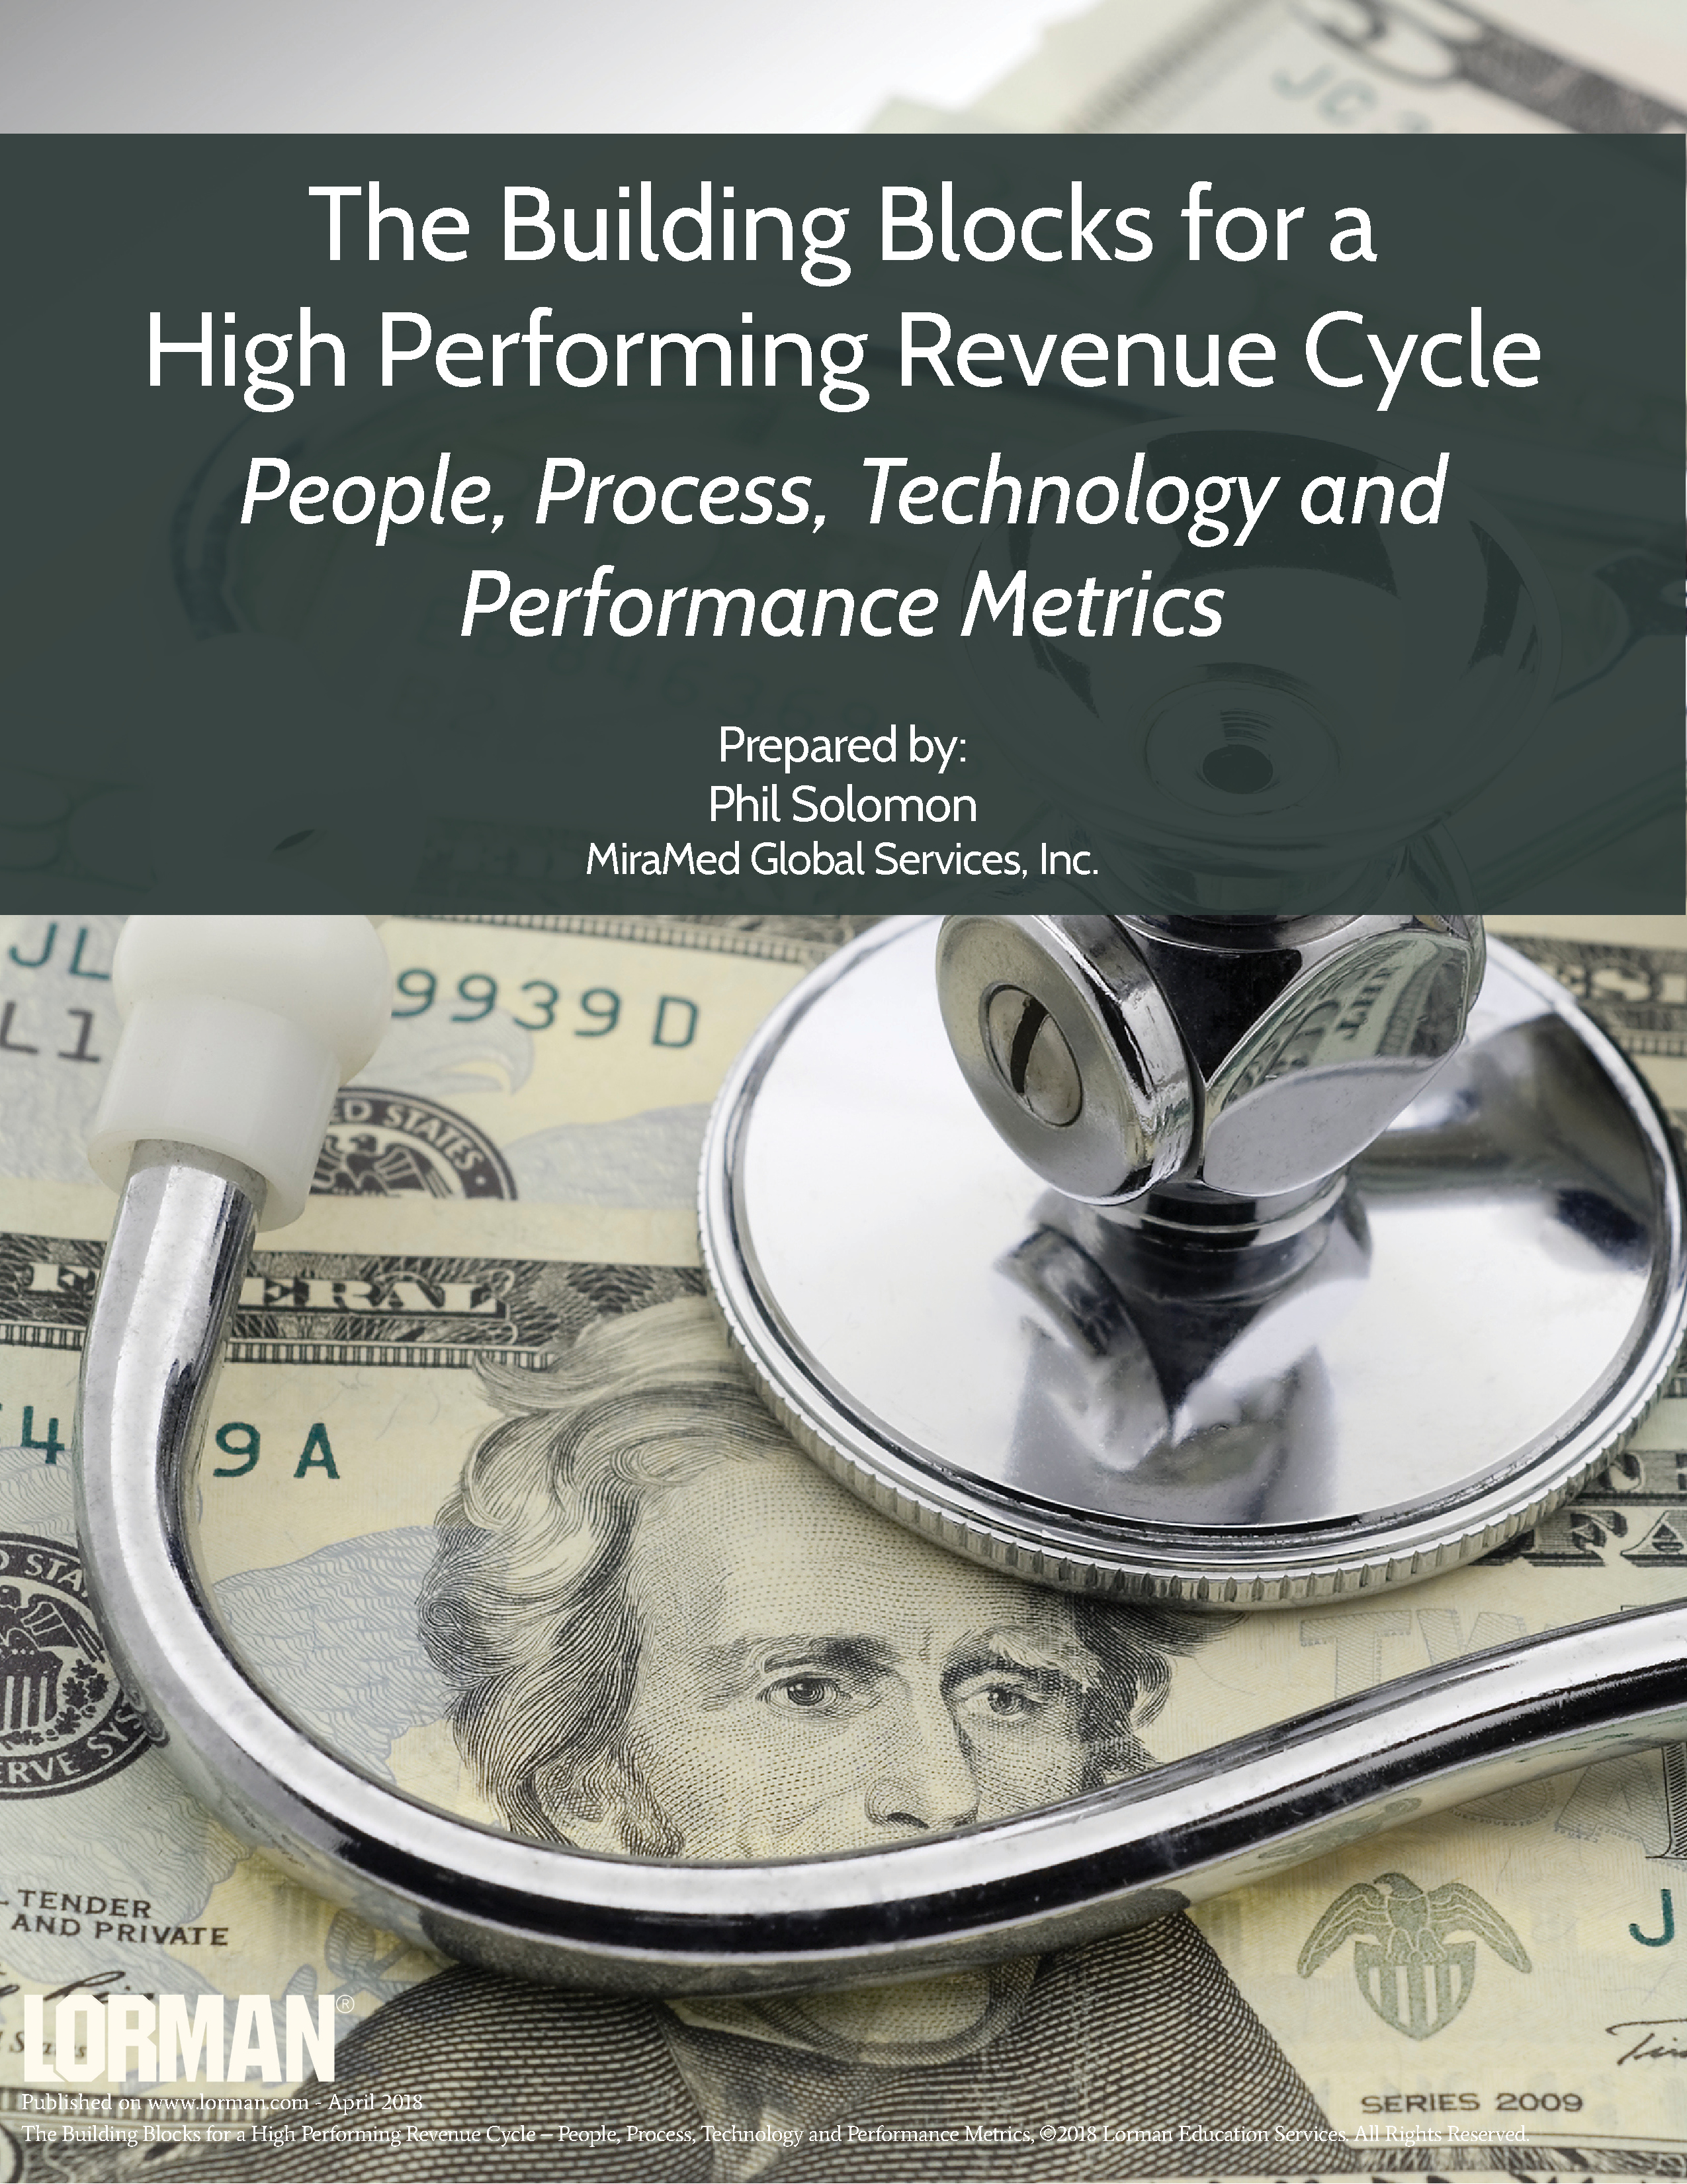 The Building Blocks for a High Performing Revenue Cycle